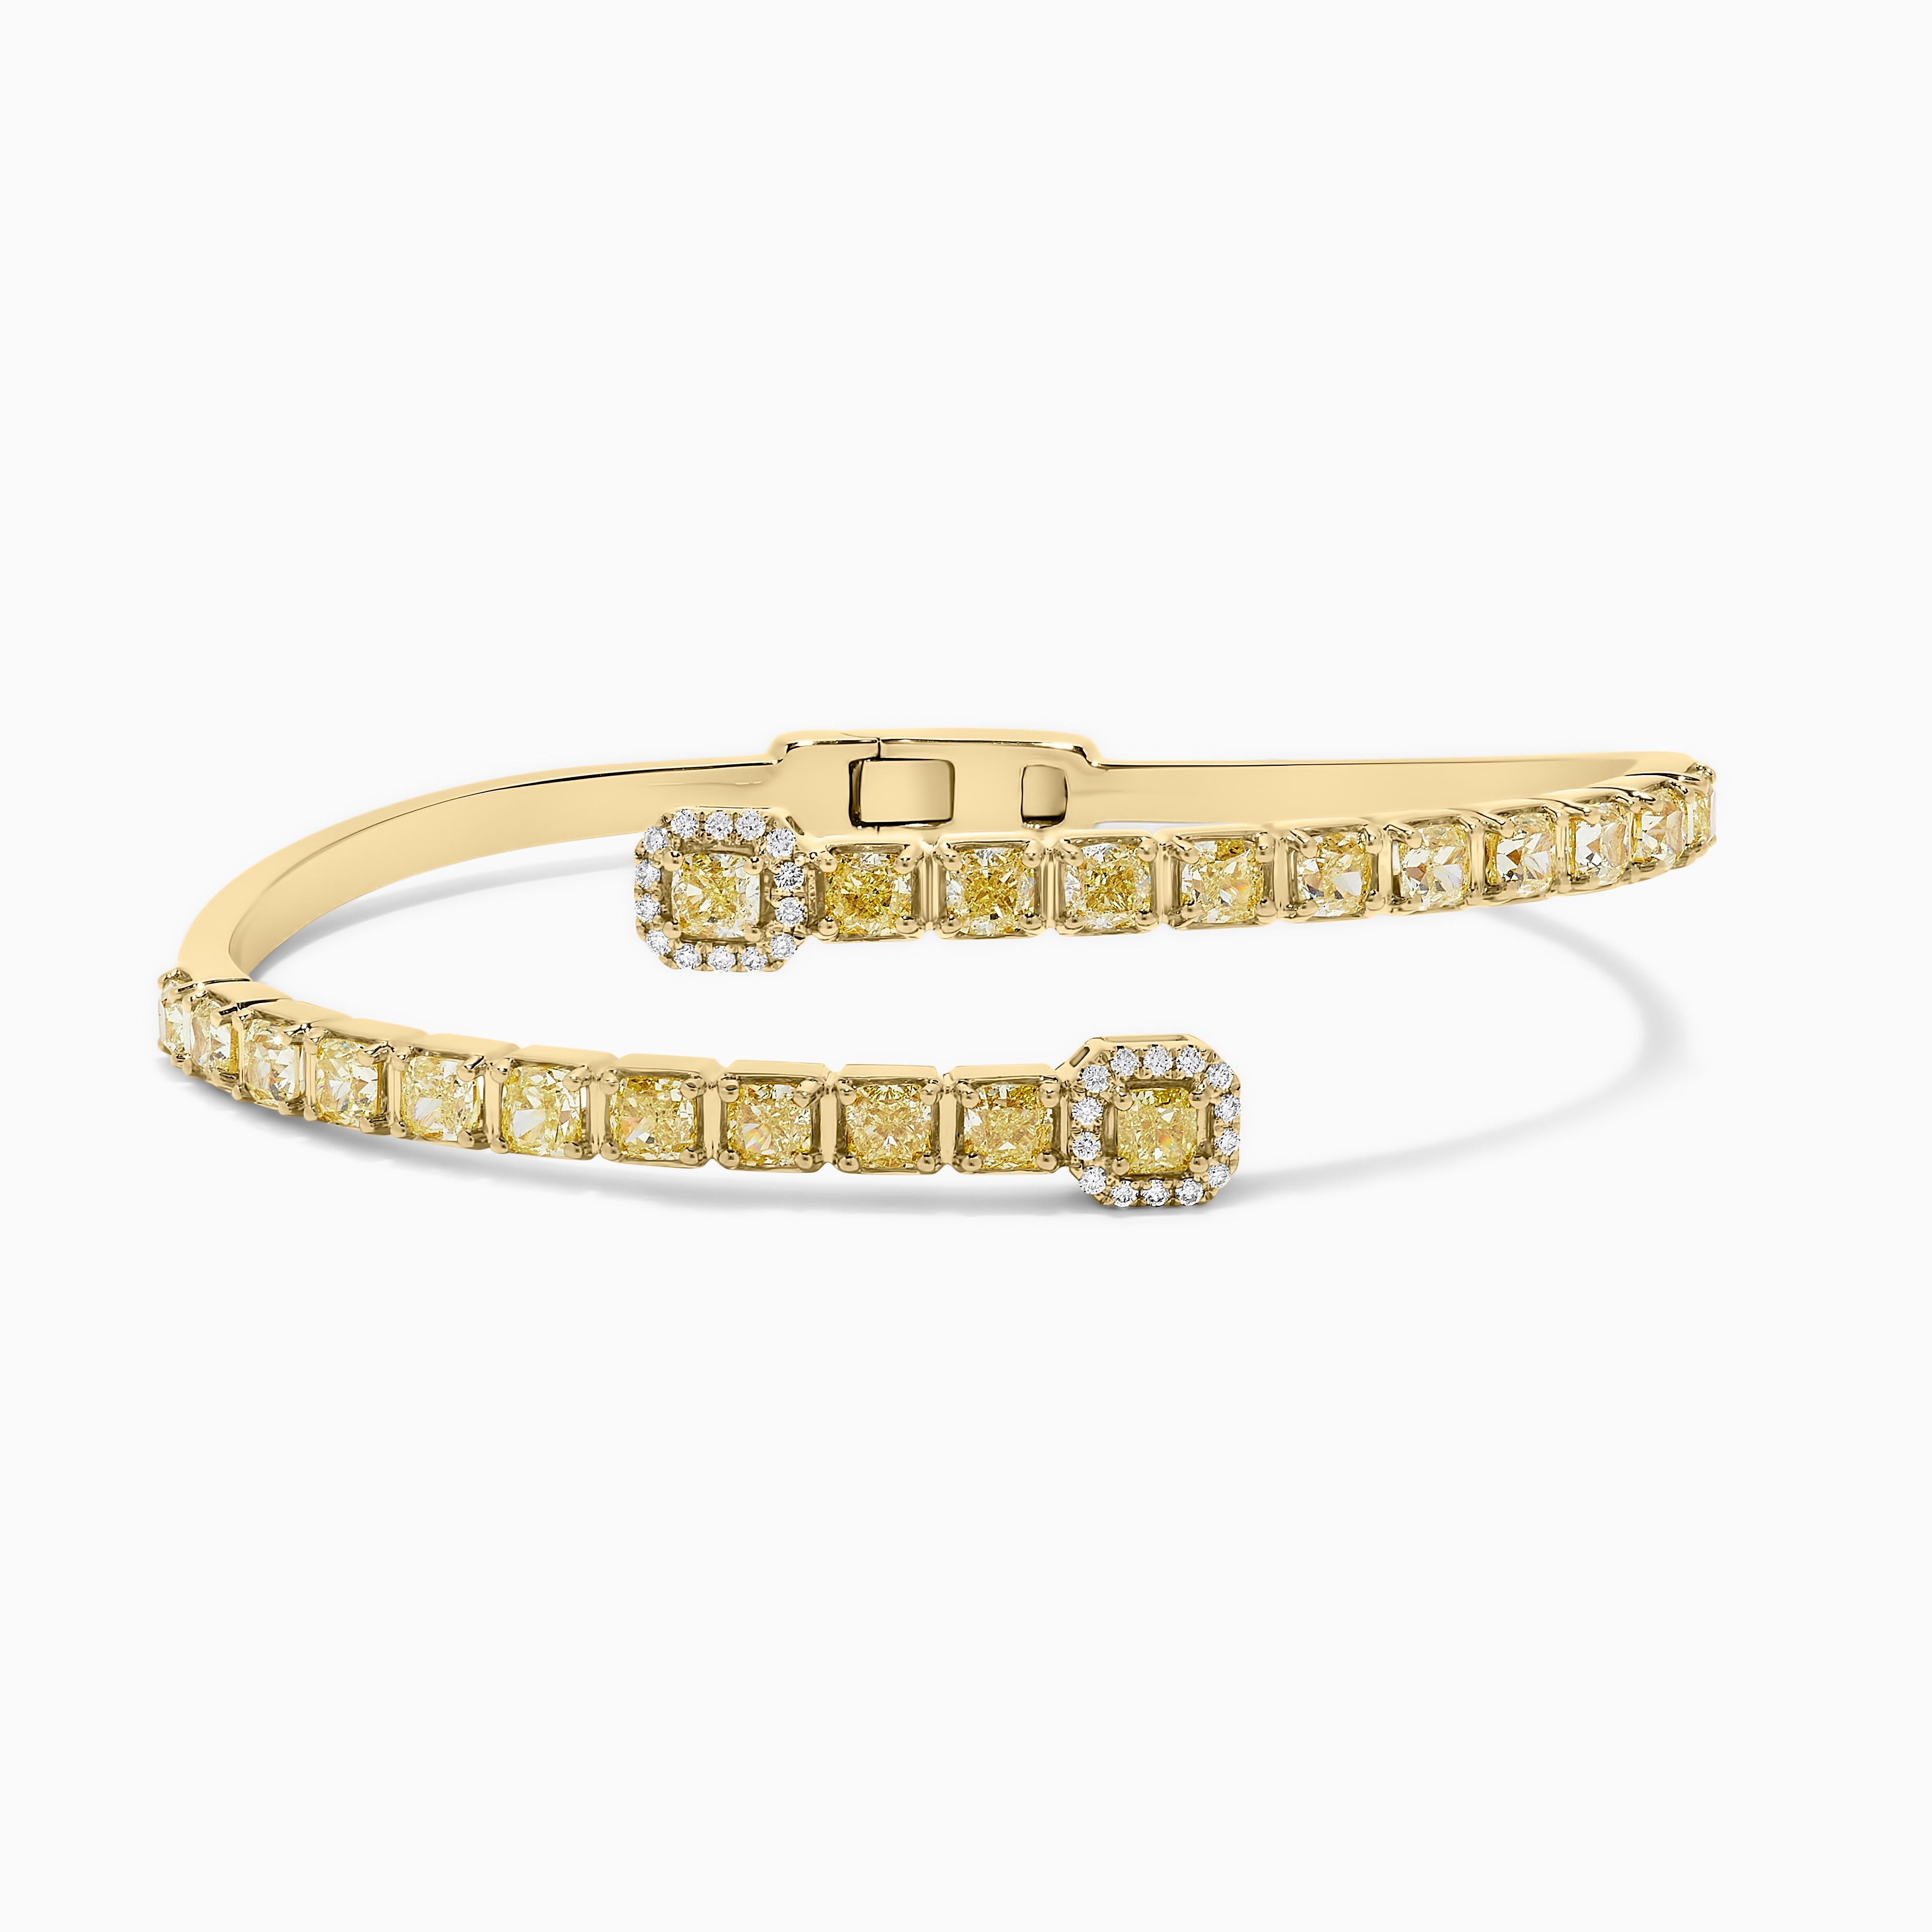 RareGemWorld's classic diamond bracelet. Mounted in a beautiful 18K Yellow Gold setting with natural cushion cut yellow diamonds. The yellow diamonds are surrounded by small round natural white diamond melee. This bracelet is guaranteed to impress!